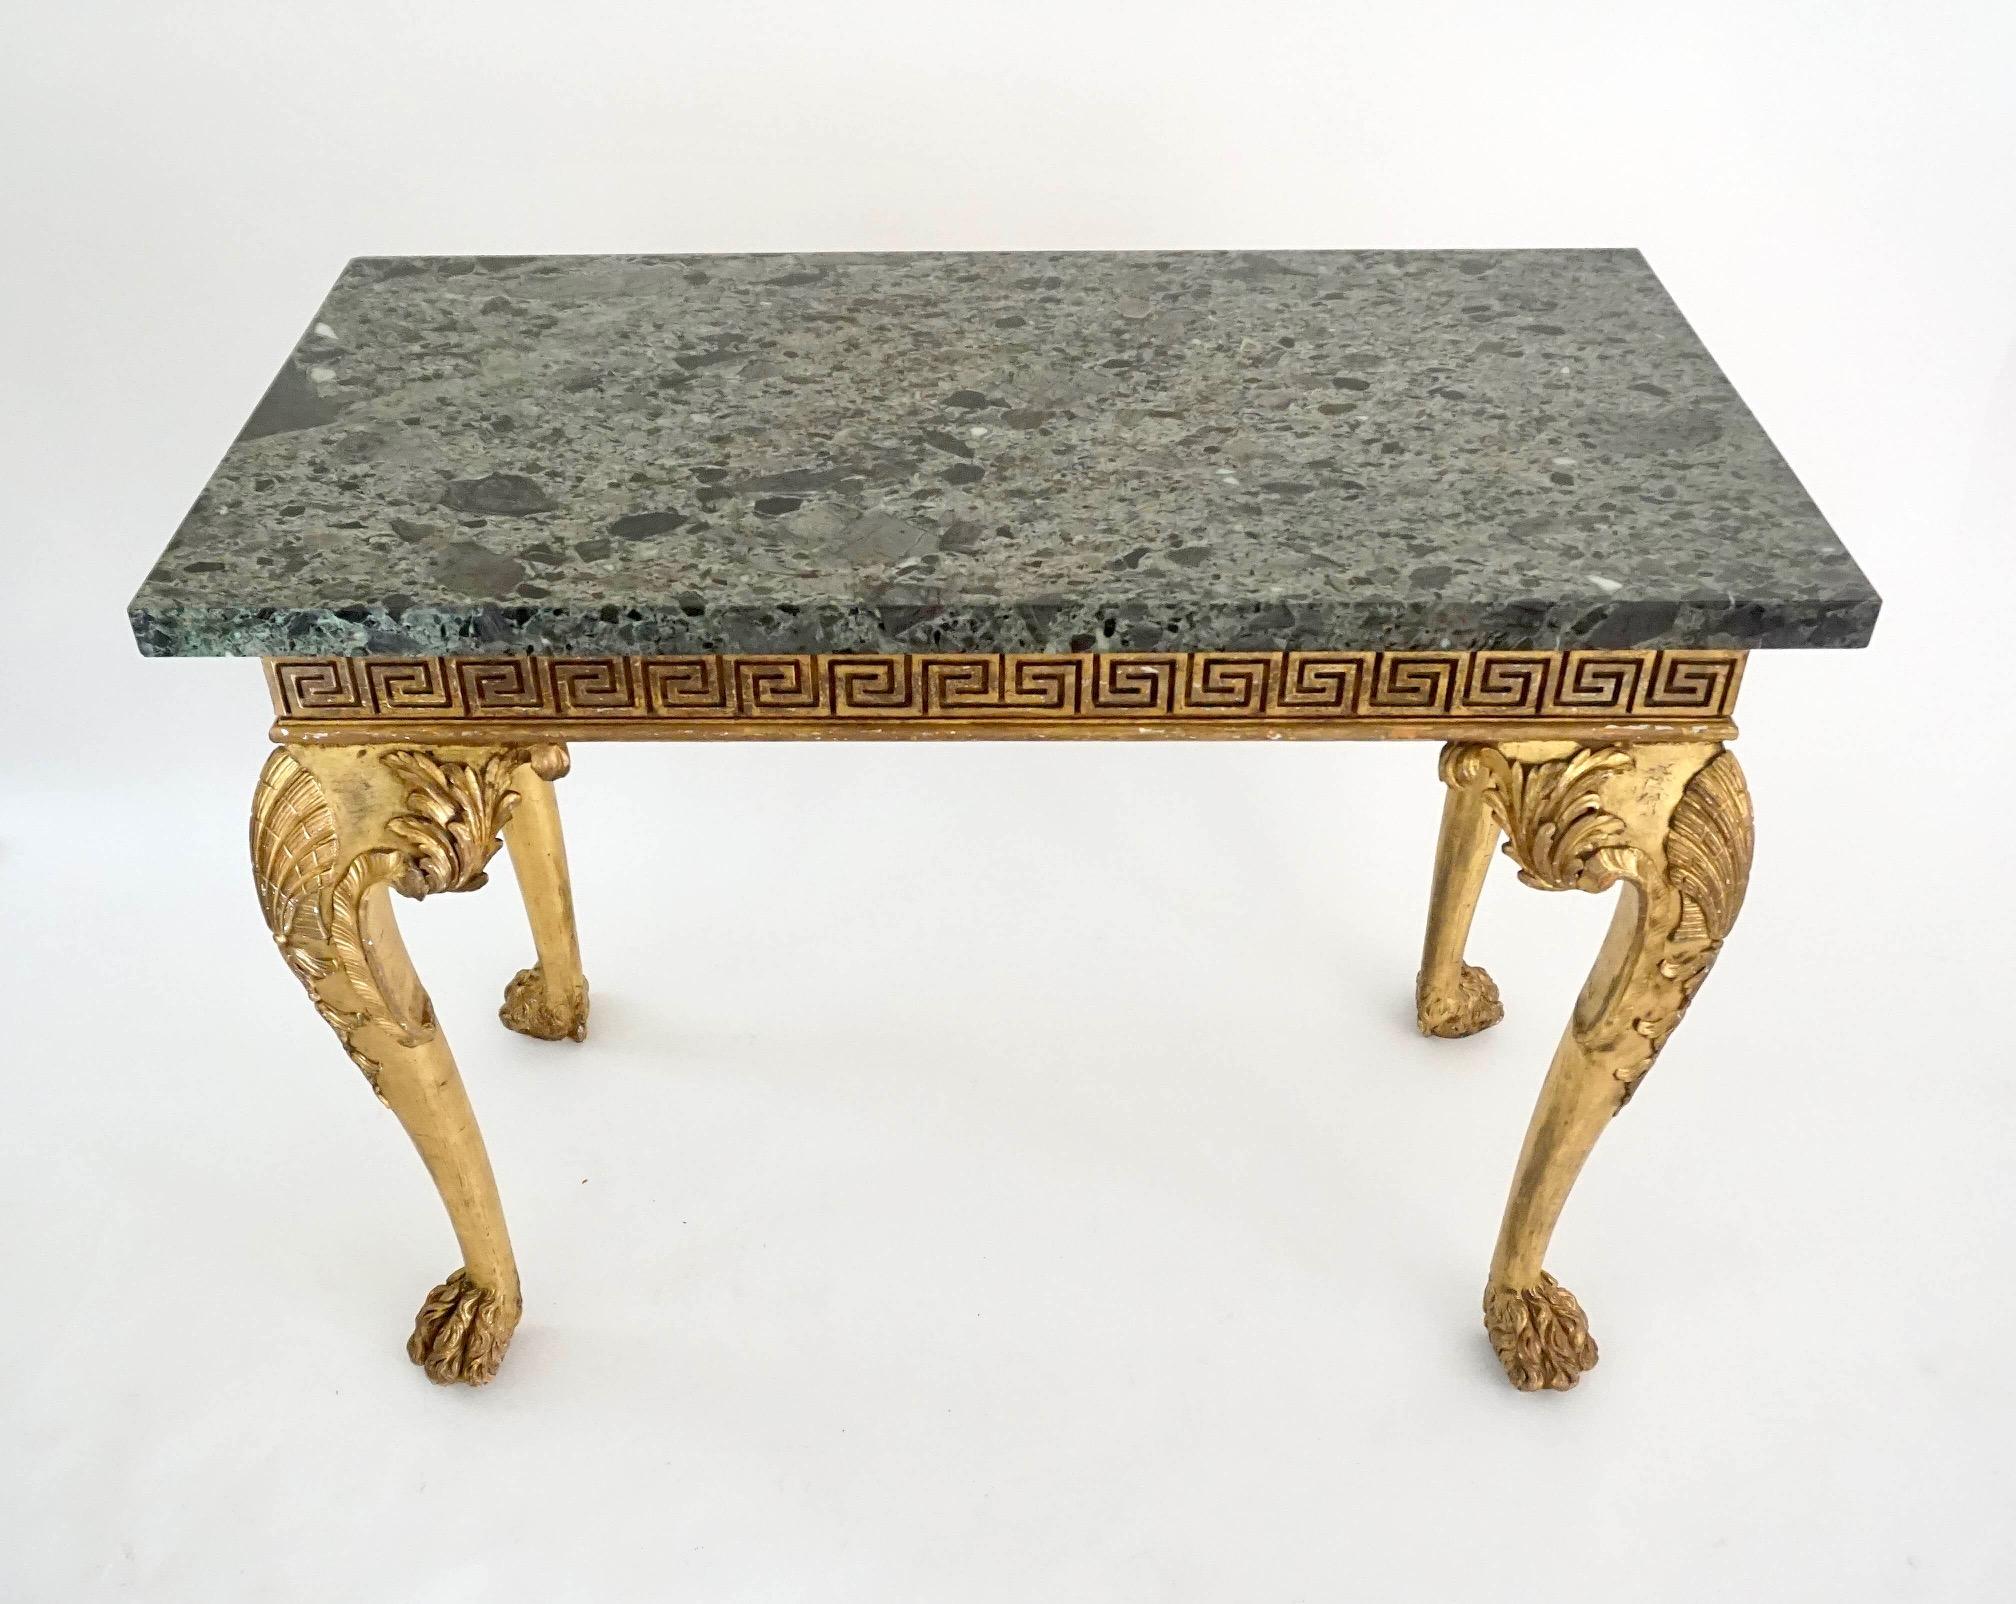 Anglo-Irish Regency Giltwood Side Tables, Manner of William Kent, circa 1815 For Sale 5